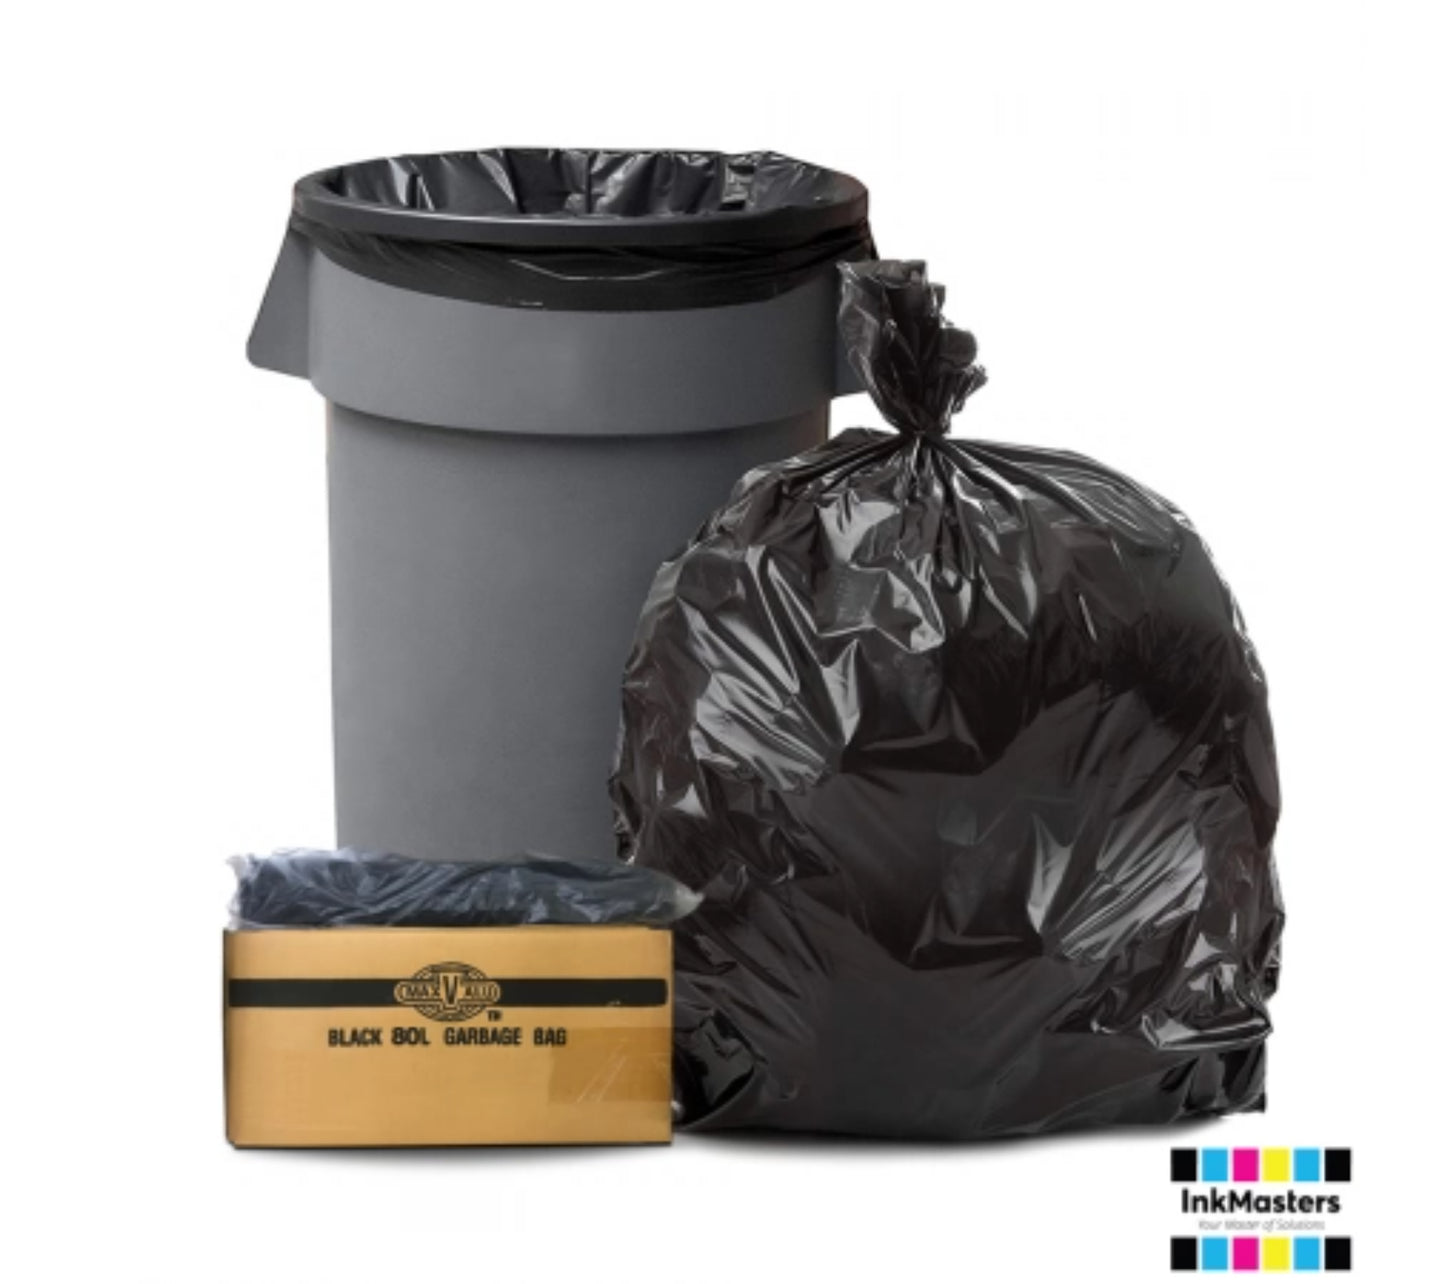 HDX 50 Gal. Extra Large Black Trash Garbage Bags 50-Count Draw & Tie 960362  